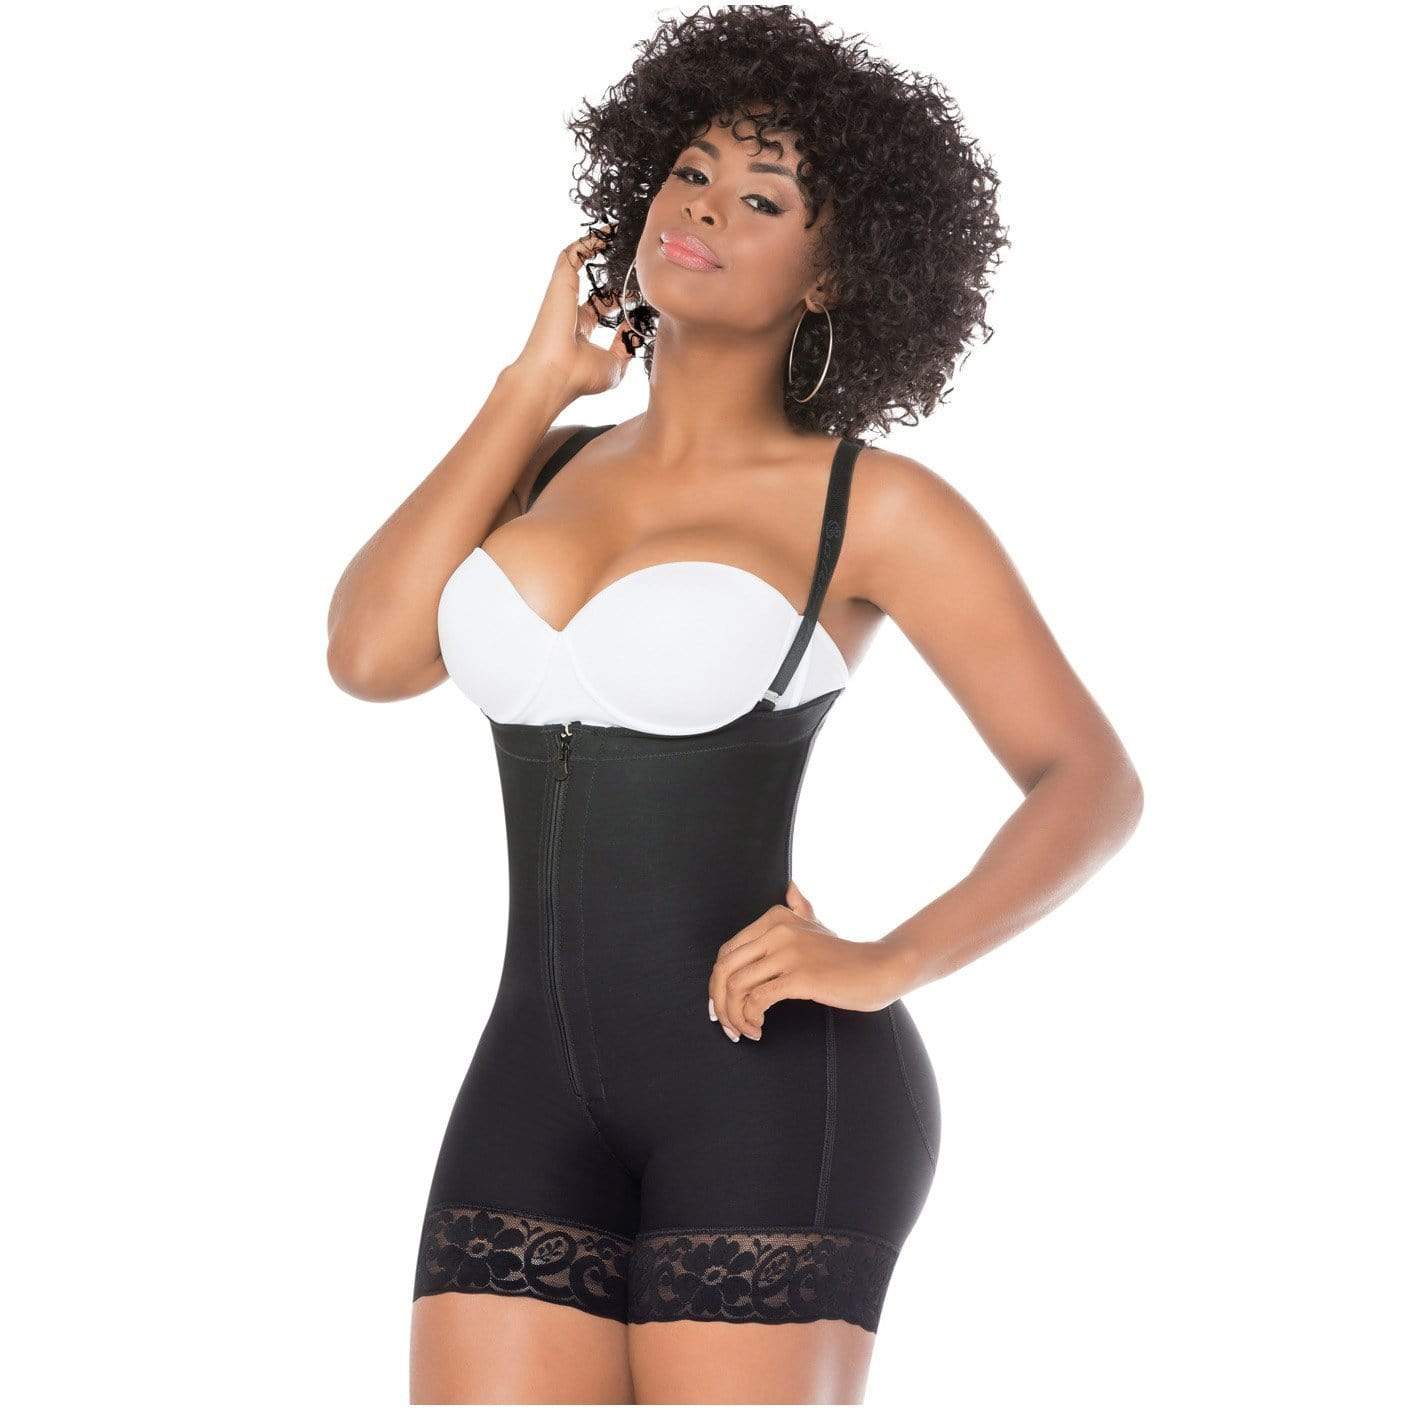 Salome 217 Full Body Shaper with Zipper for Women Fajas Colombianas  Reductoras - ETP Fashion